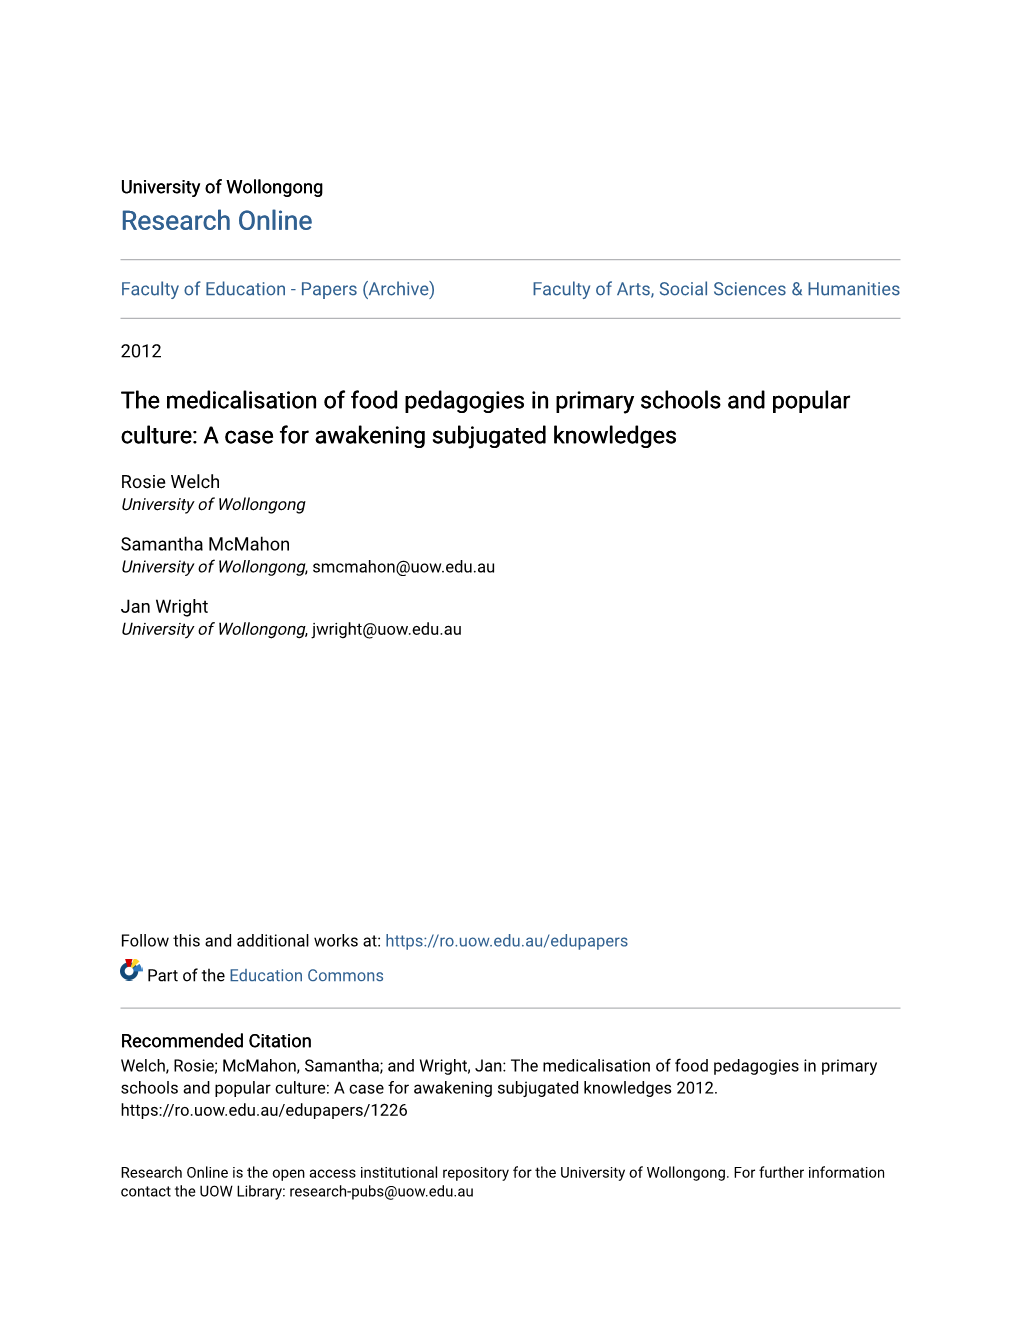 The Medicalisation of Food Pedagogies in Primary Schools and Popular Culture: a Case for Awakening Subjugated Knowledges